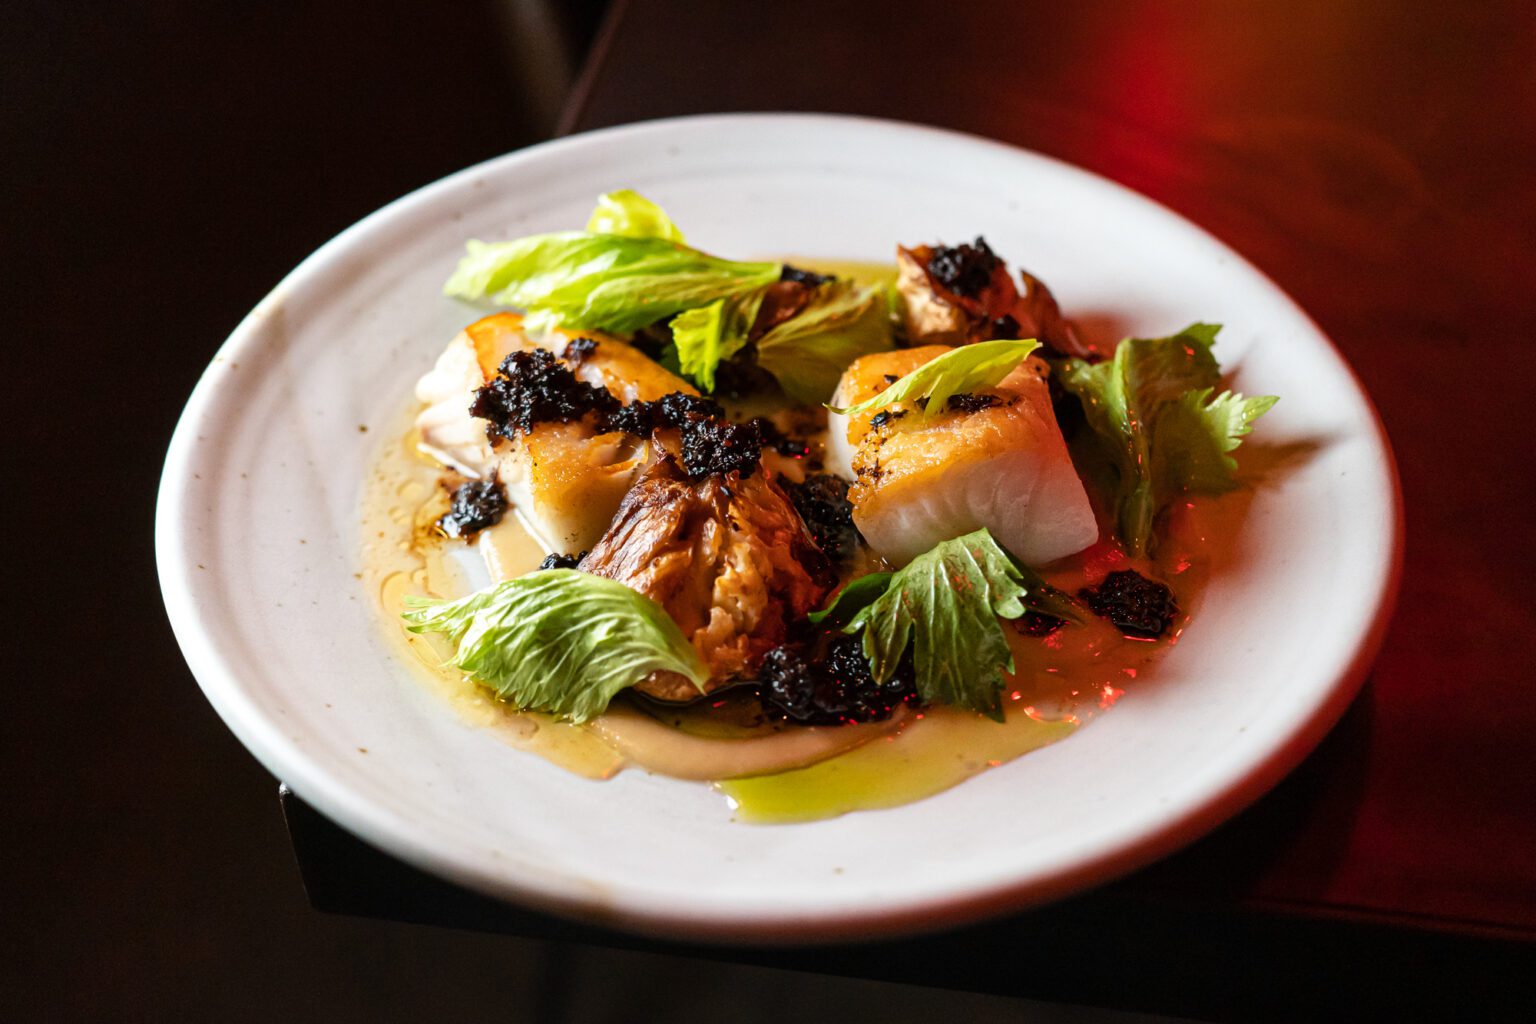 Carnal's seared black cod features smoked celery root XO sauce, bay leaf and bergamot. Their plates are made to share, making them an ideal Valentine's Day destination.